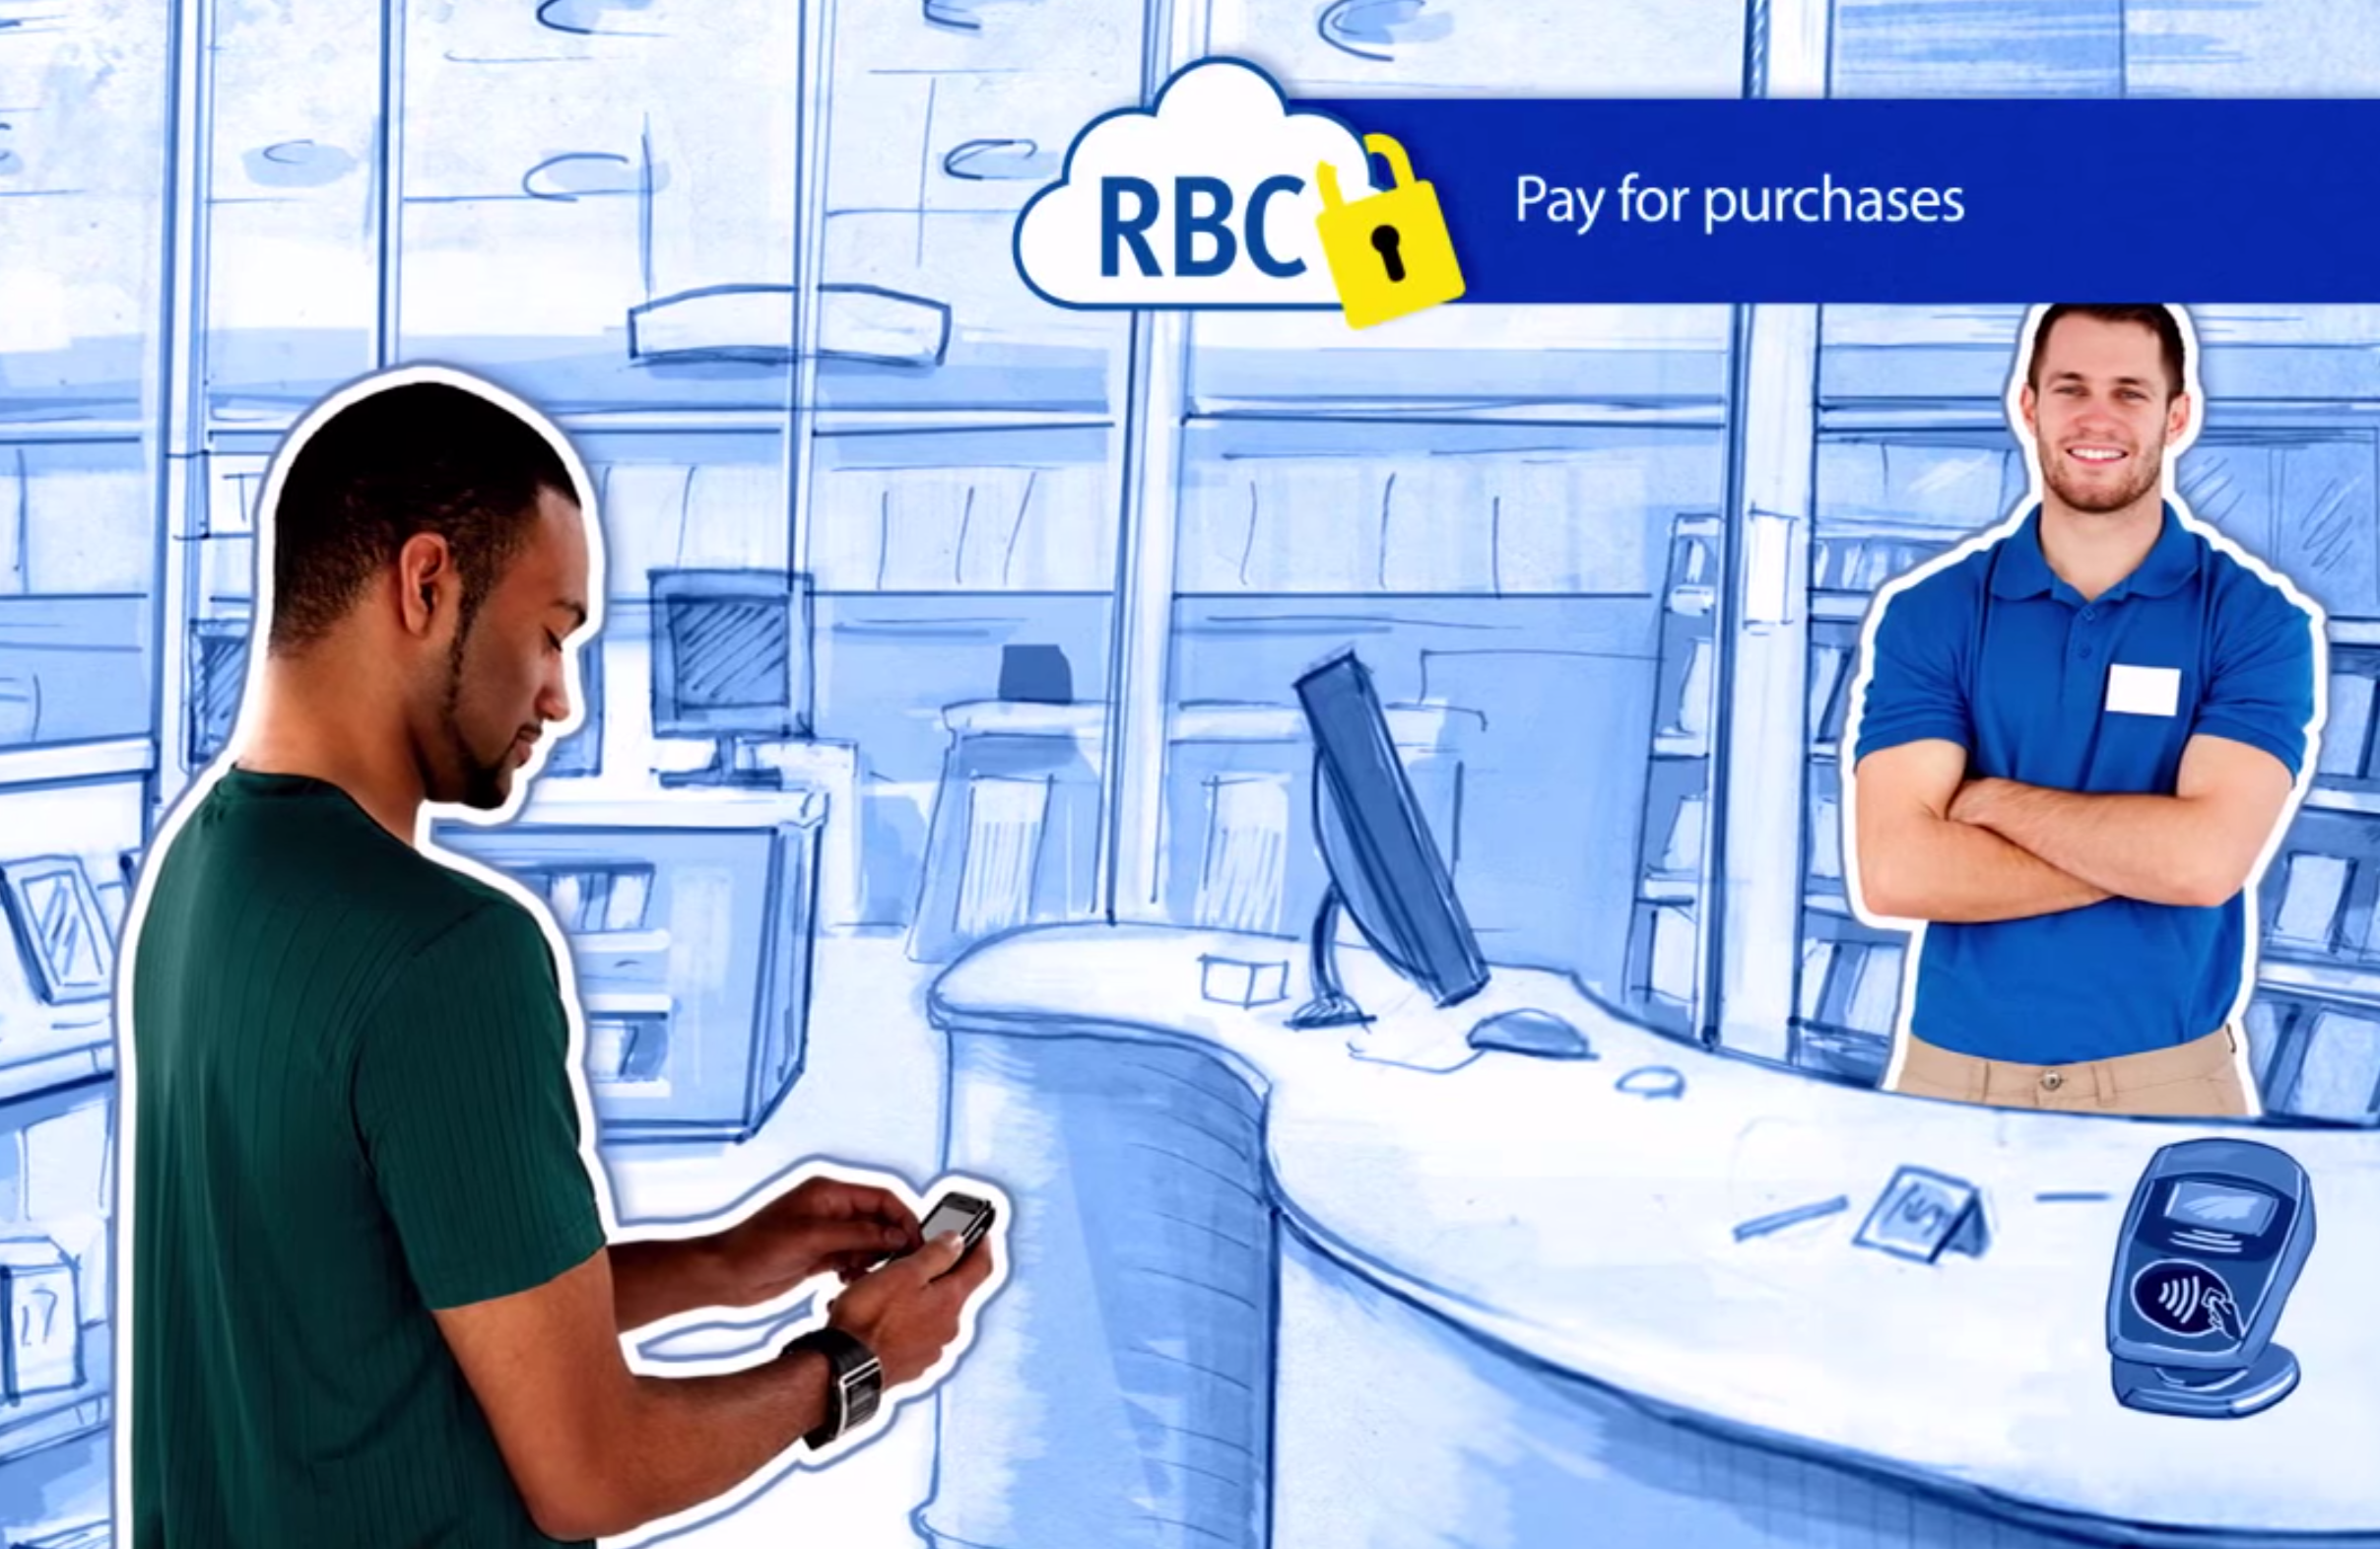 RBC mobile payments